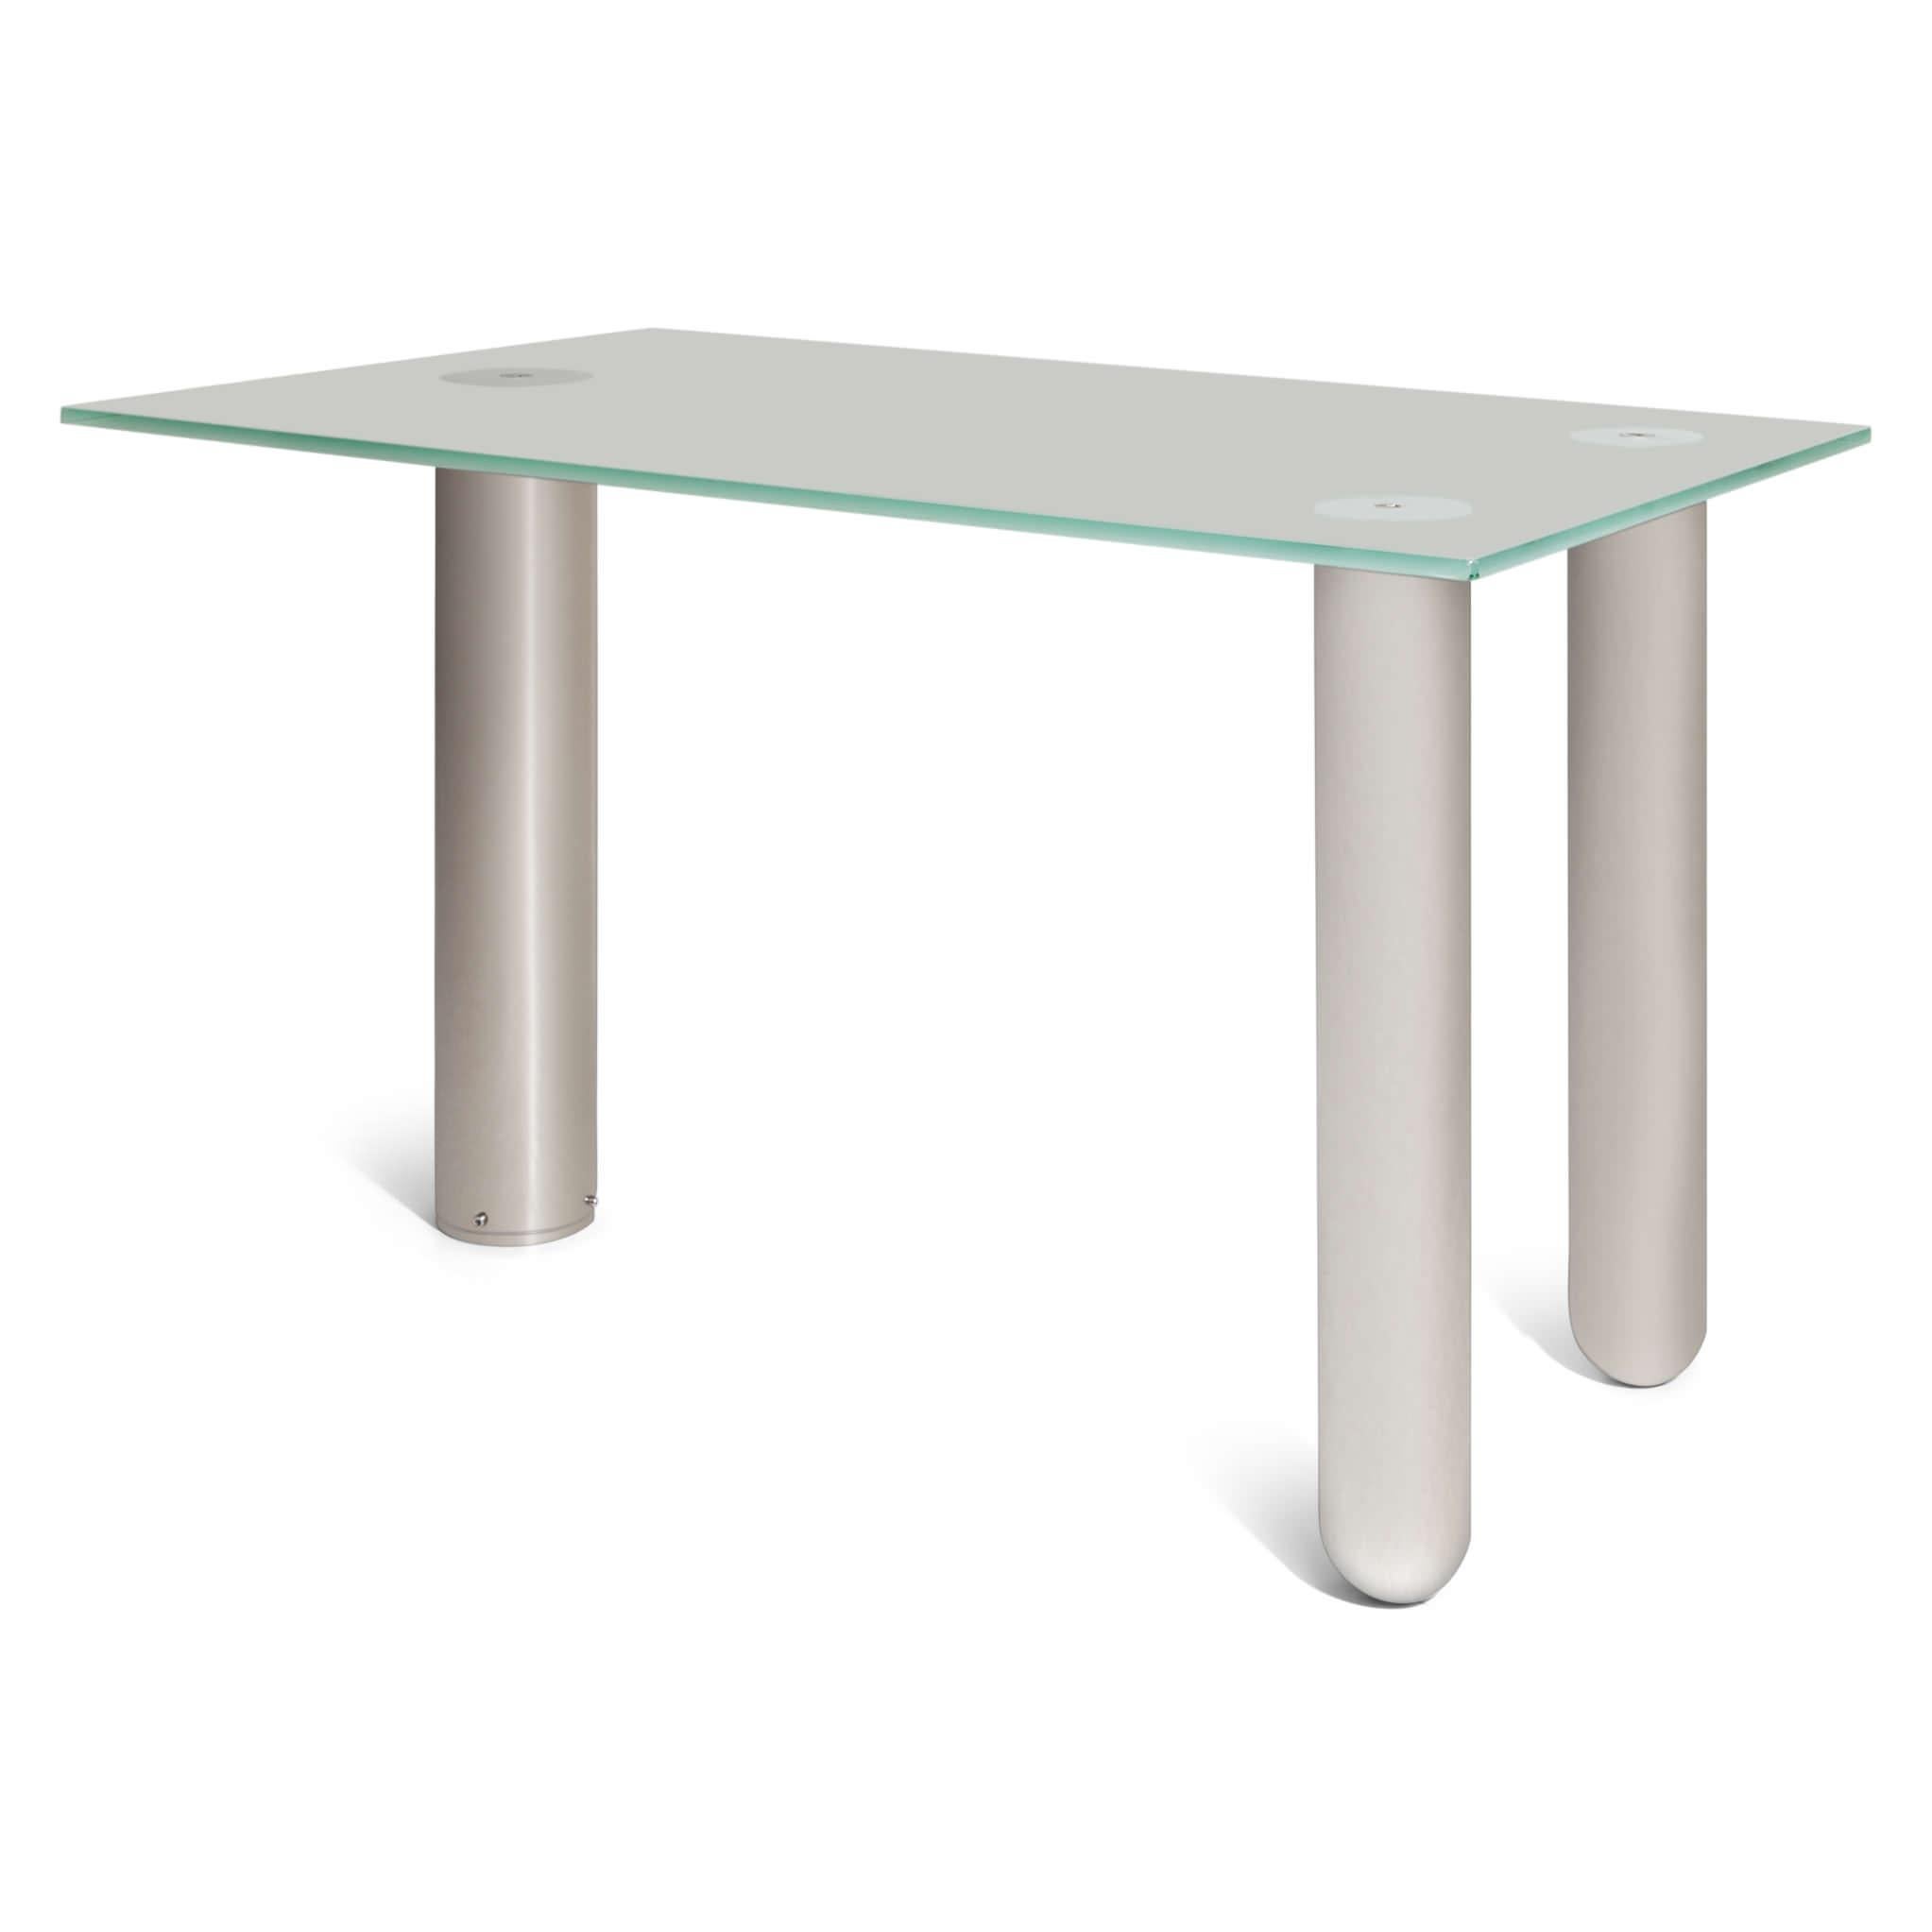 Desk, standing on three cylindrical chromed metal legs with a rectangular tabletop out of opaque glass.